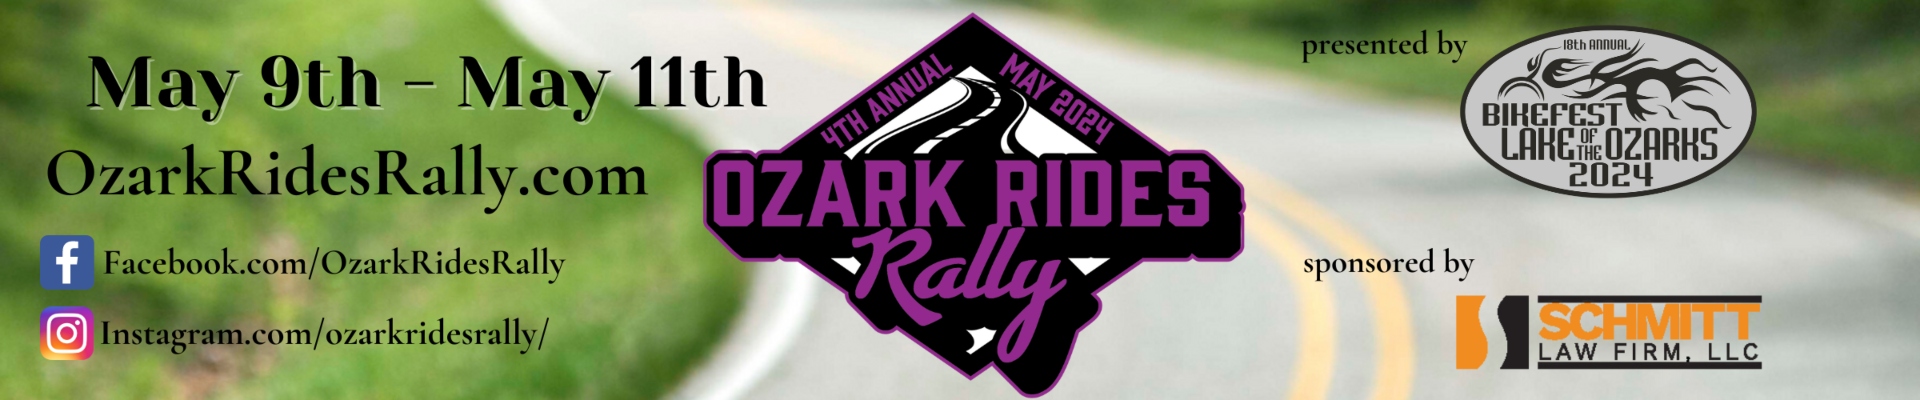 3rd Ozark Rides Rally 2023 Page Banners Headers Etc 2400 x 500 px (27)